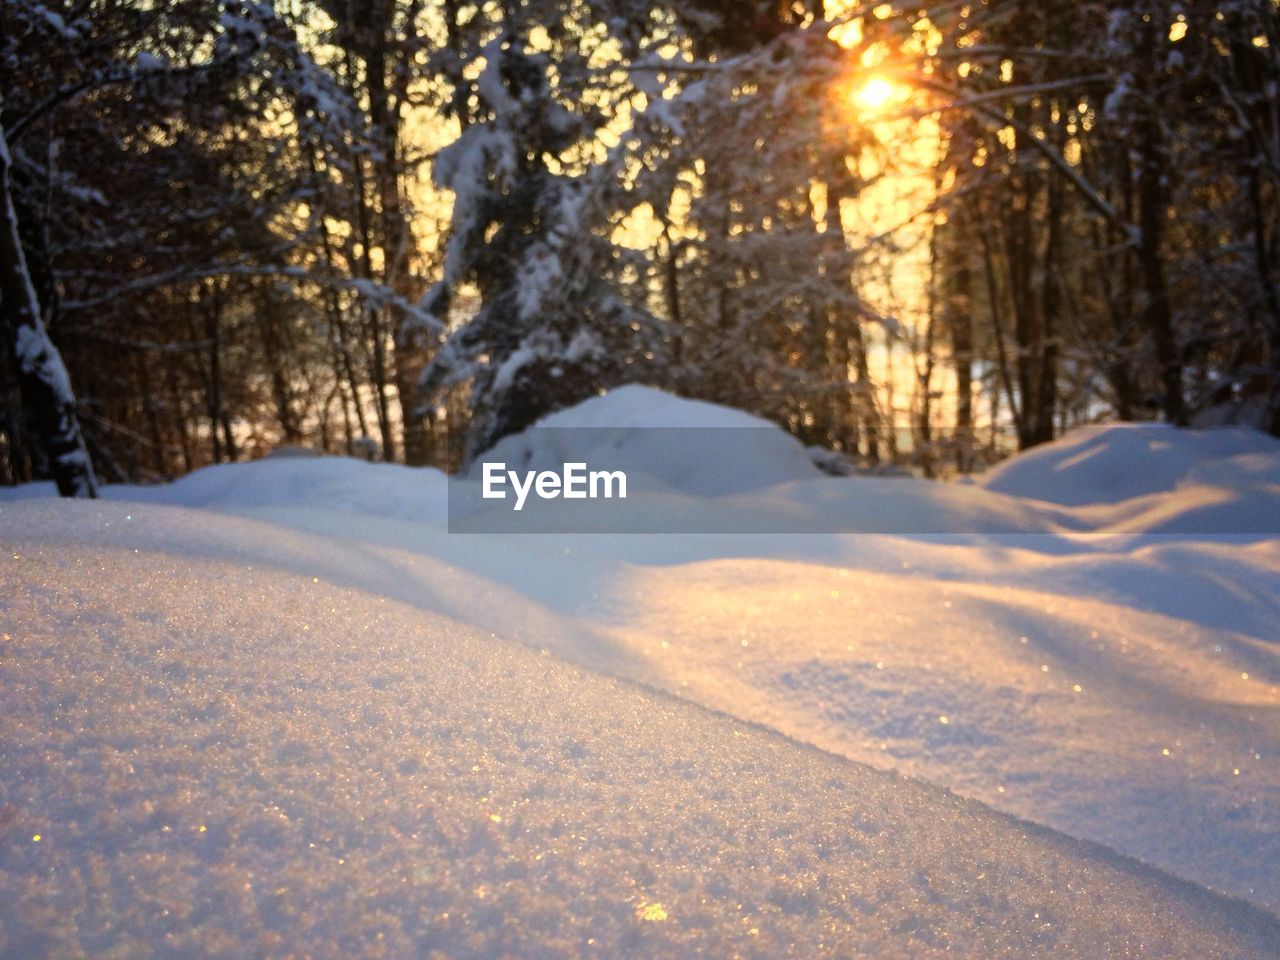 Sunlight emitting through bare trees on snow covered field